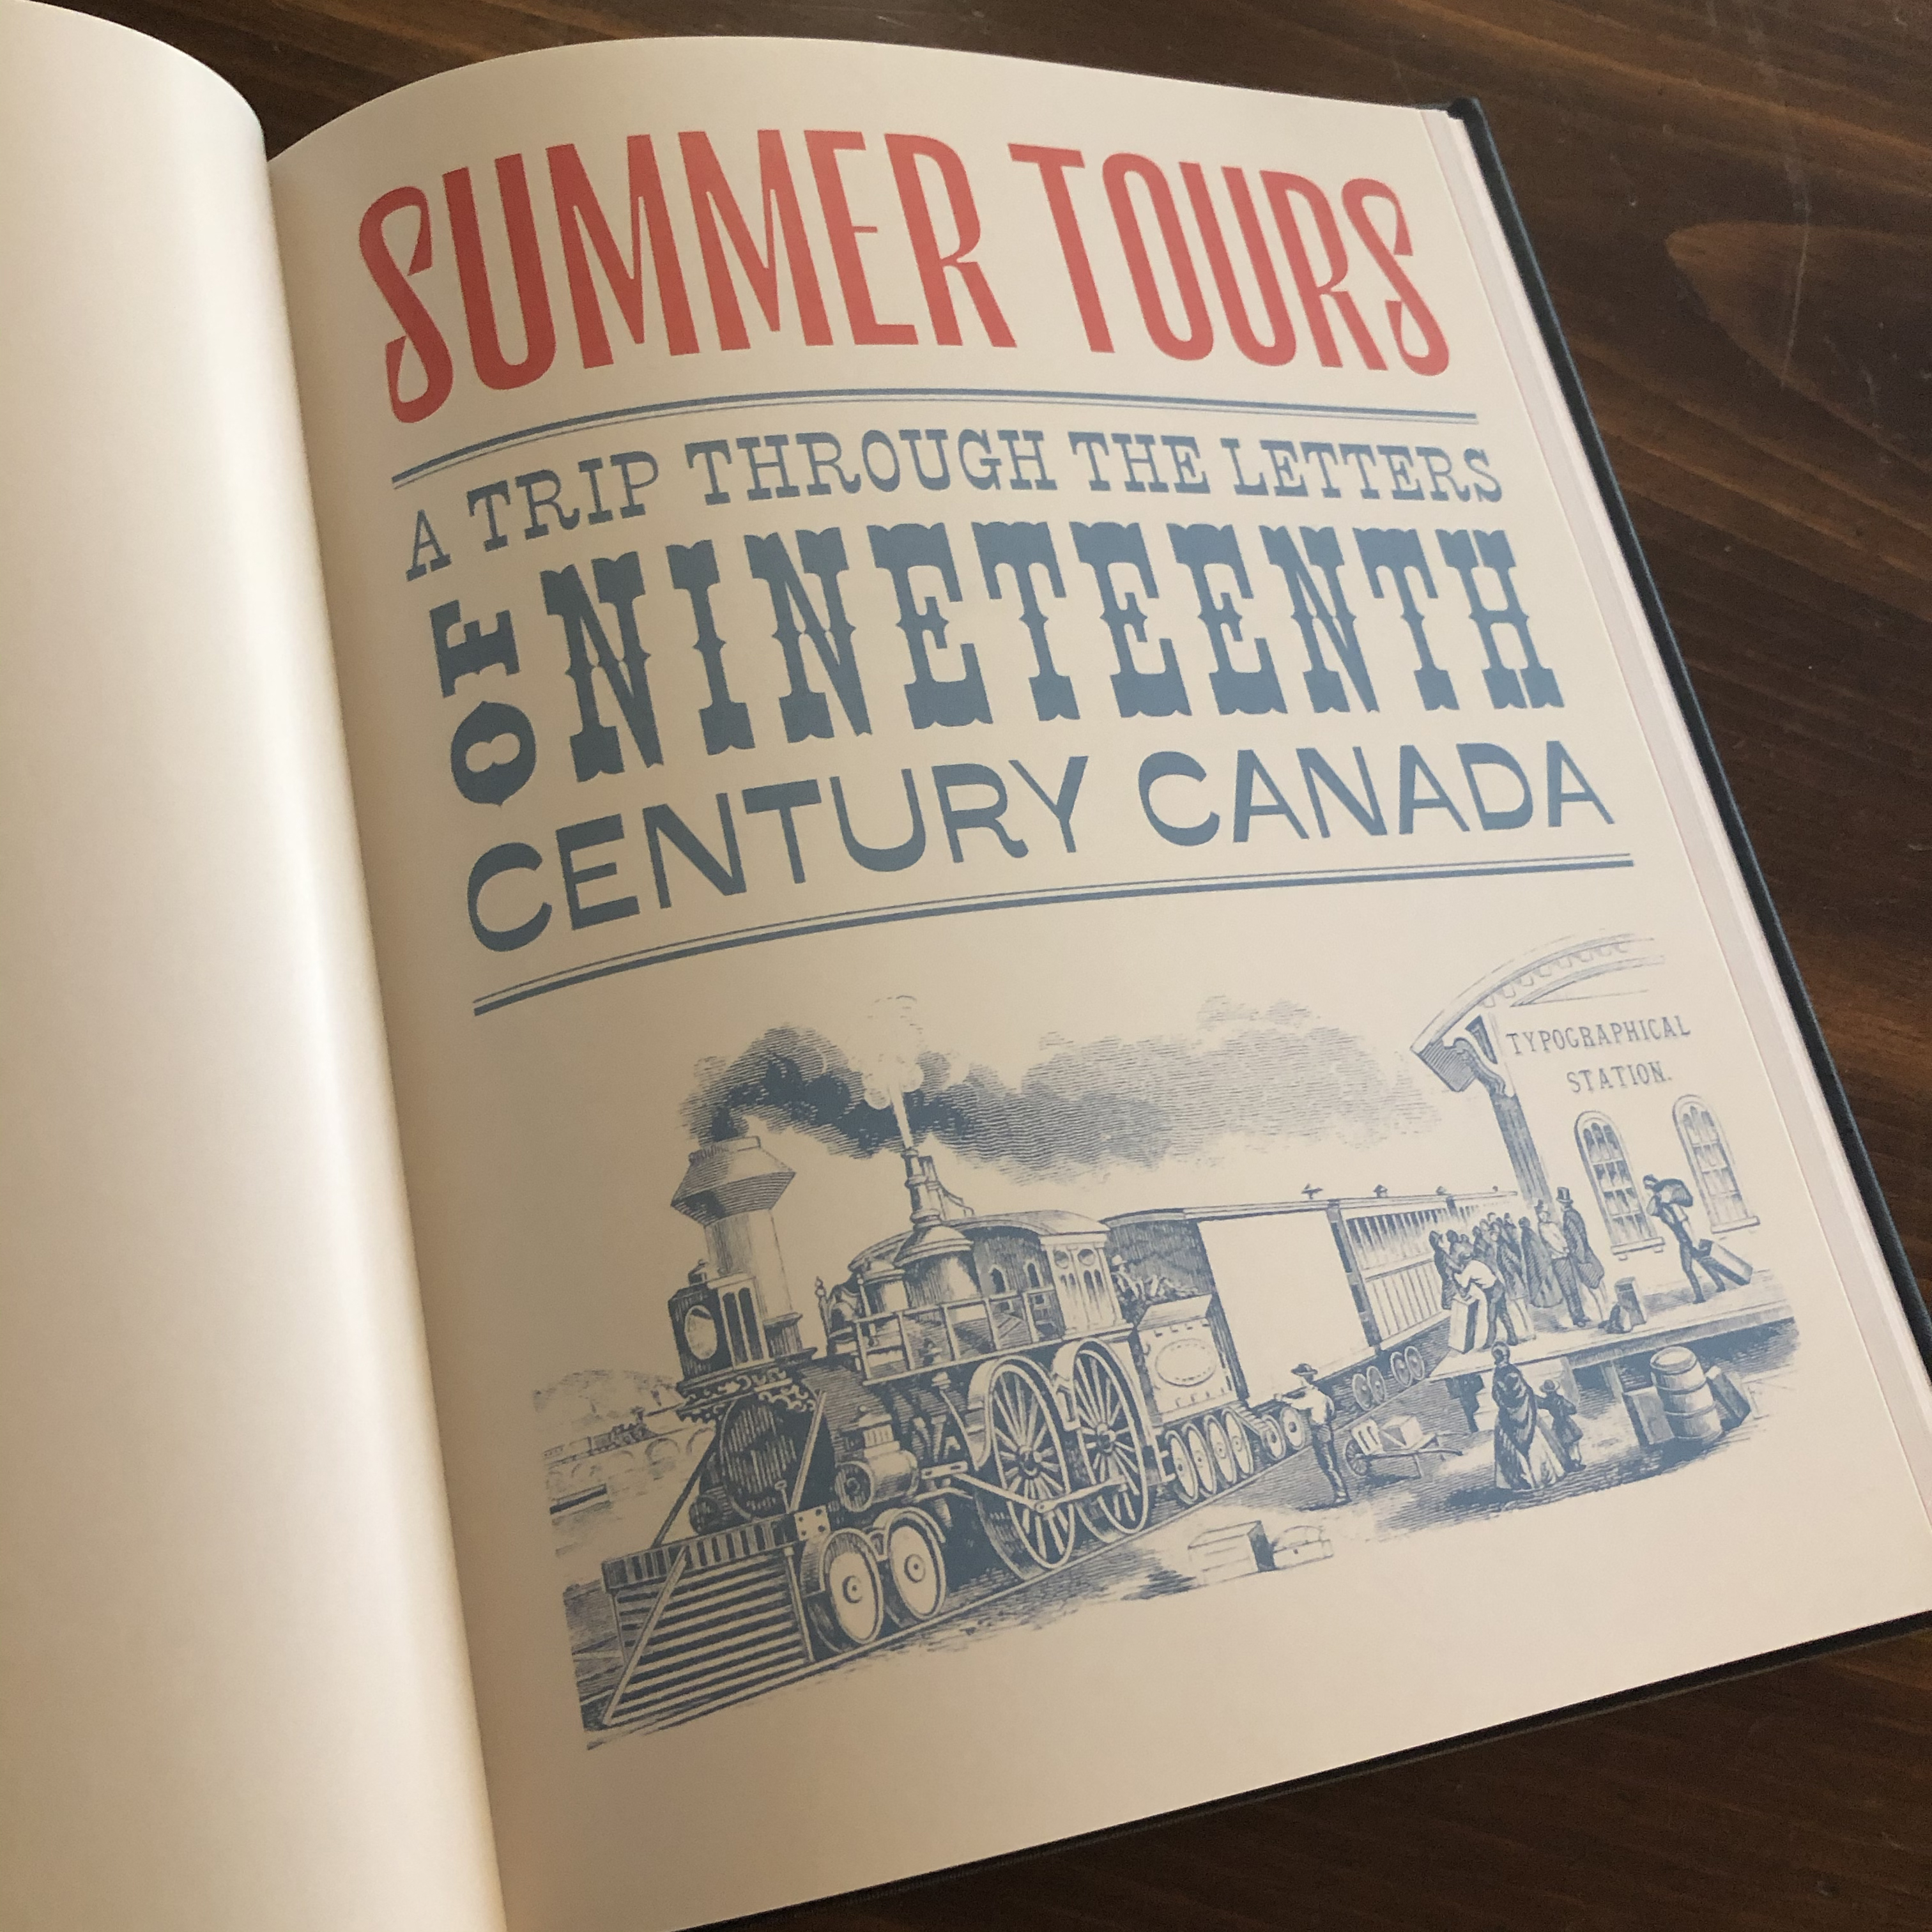 The full title of the book Summer Tours, featuring a wood block print of an old steam train waiting at the Typographical Station